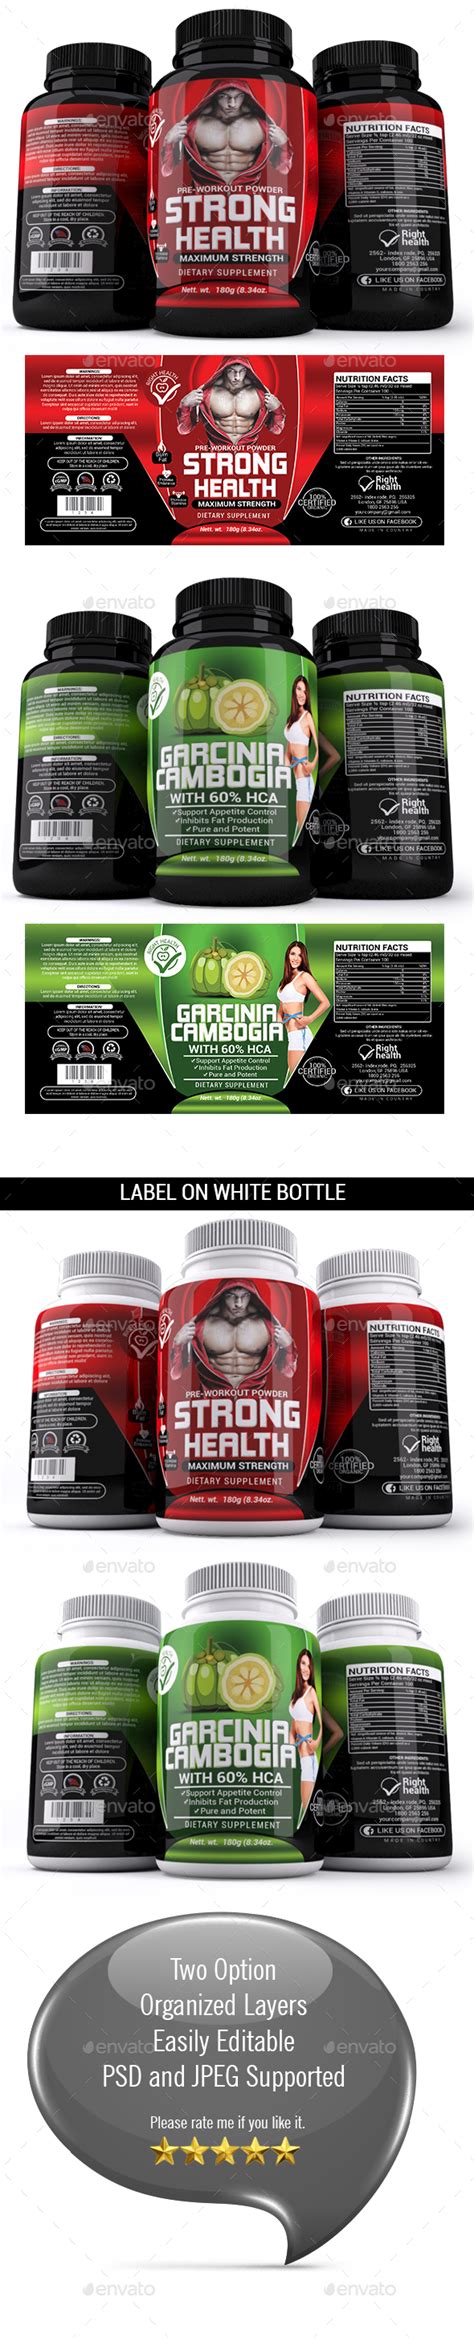 Free Supplement Label Template